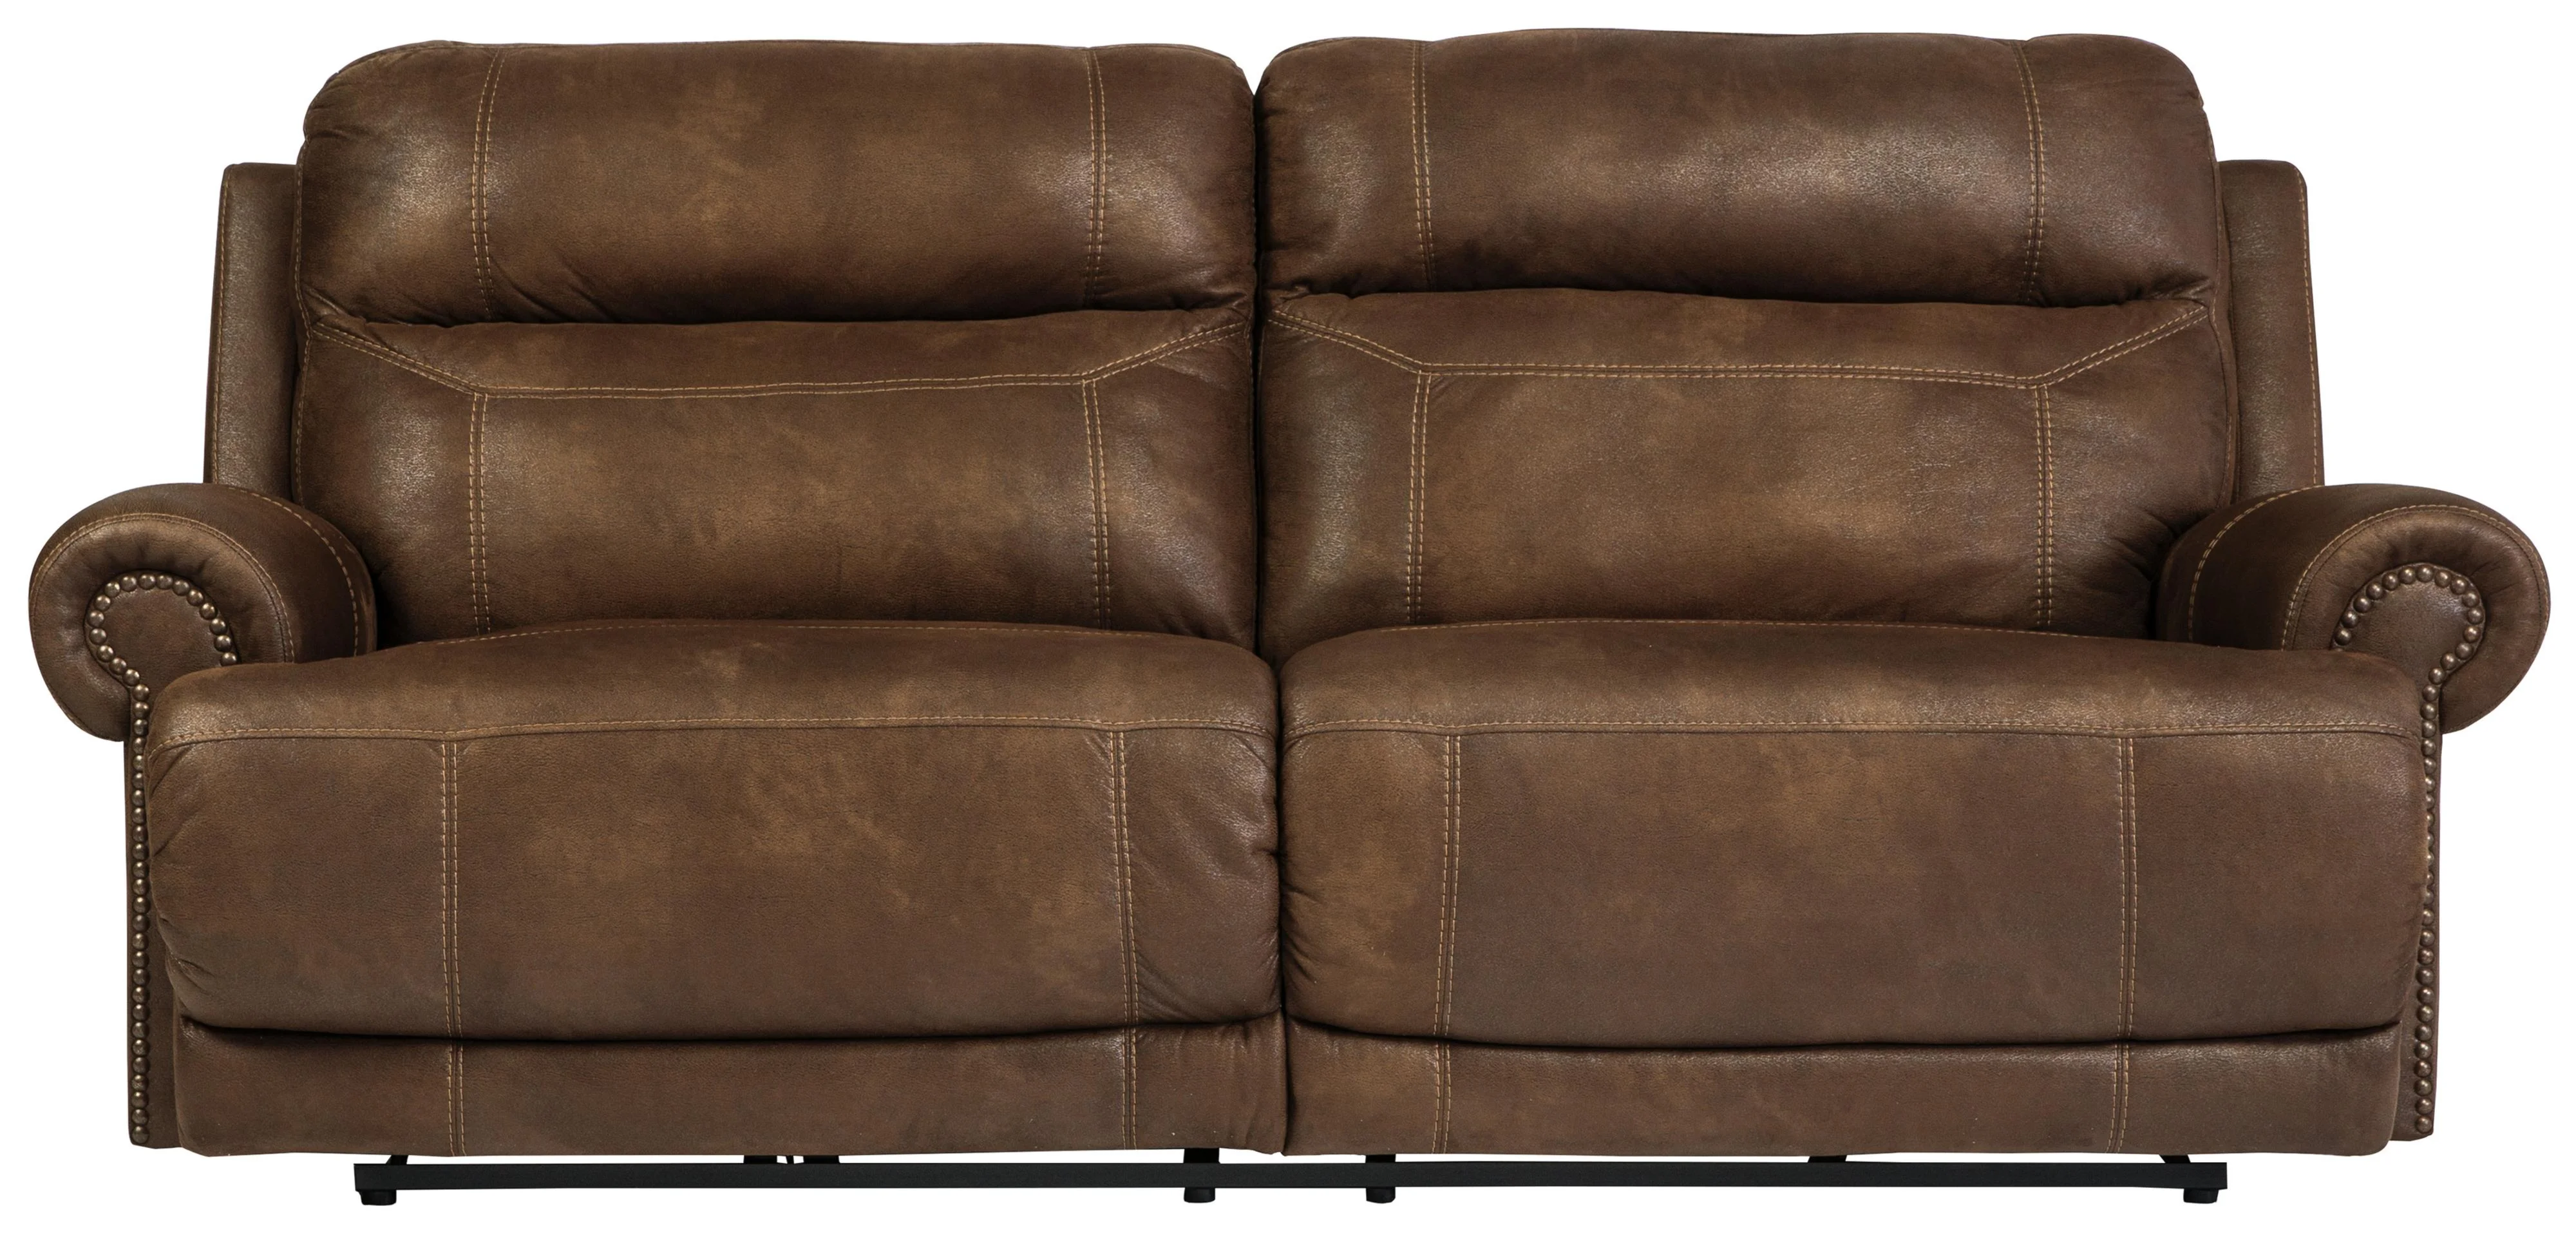 Signature Design By Ashley Austere 3840047 2 Seat Reclining Power Sofa